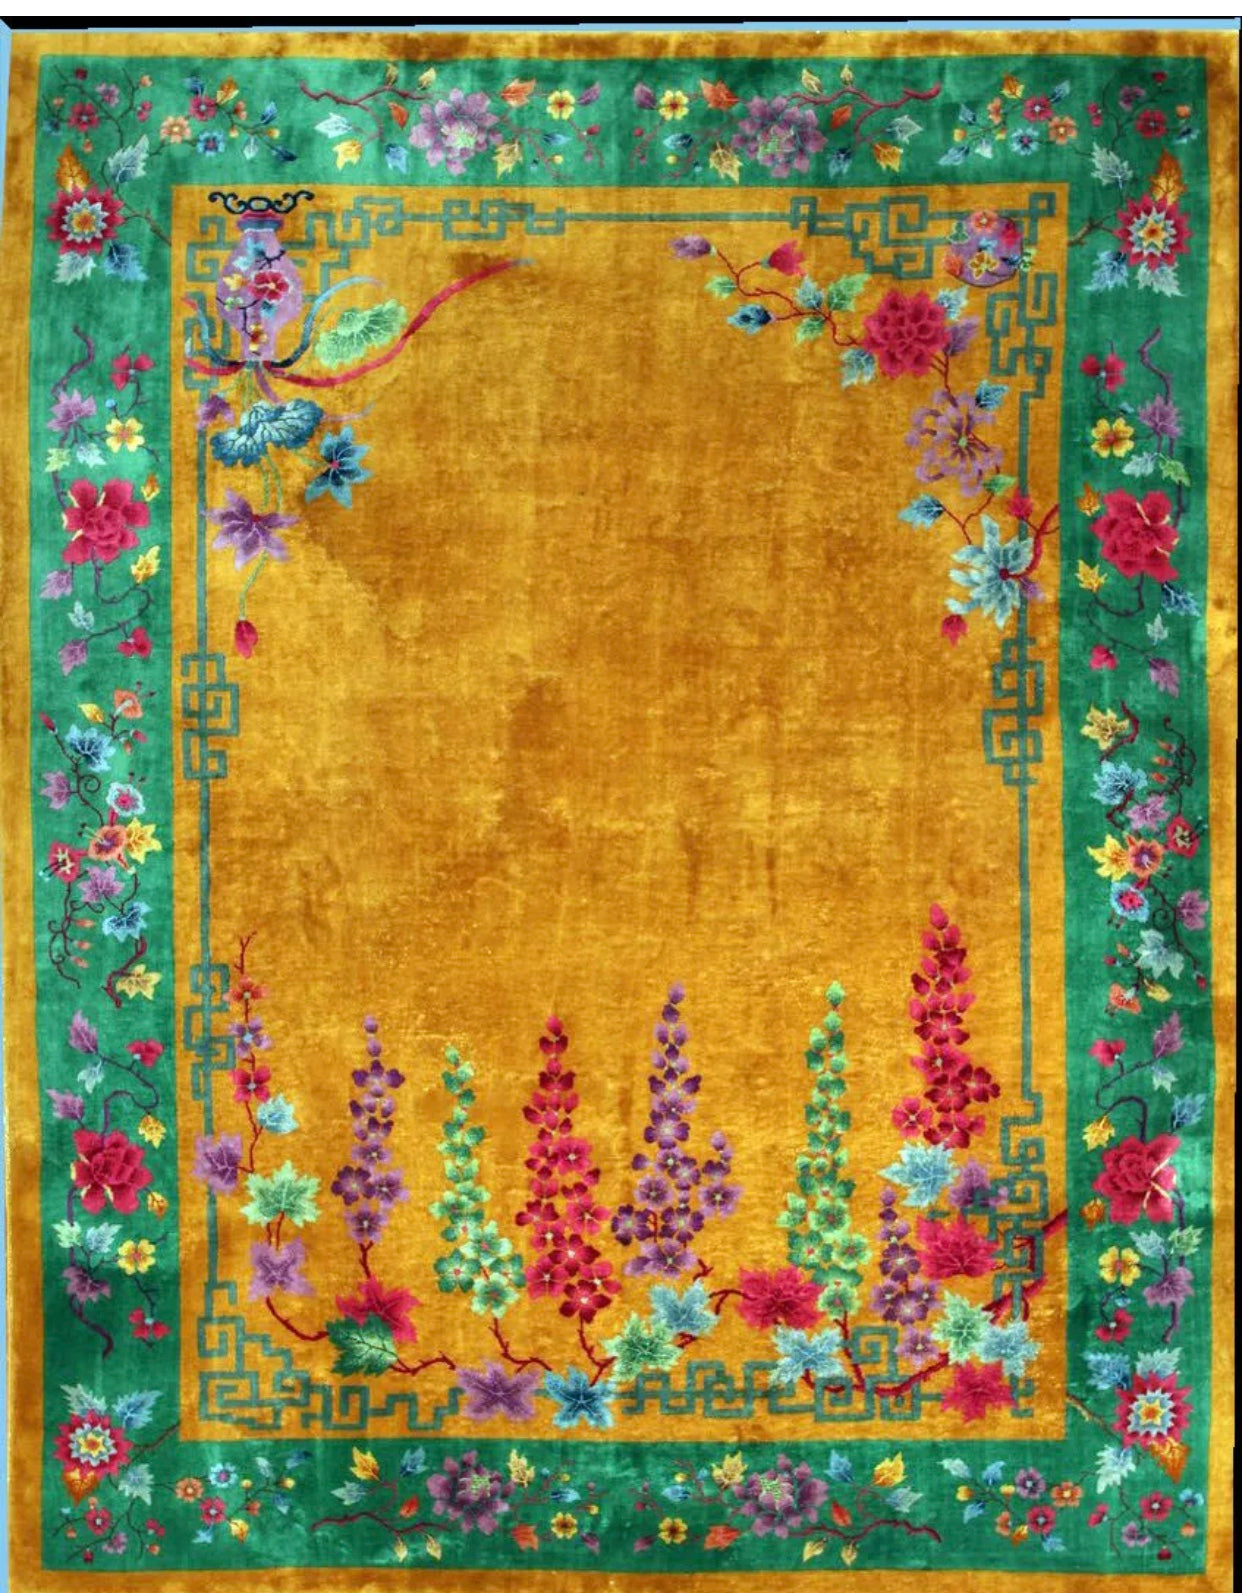 A Breathtaking Antique Gold Ground Art Deco Chinese Rug